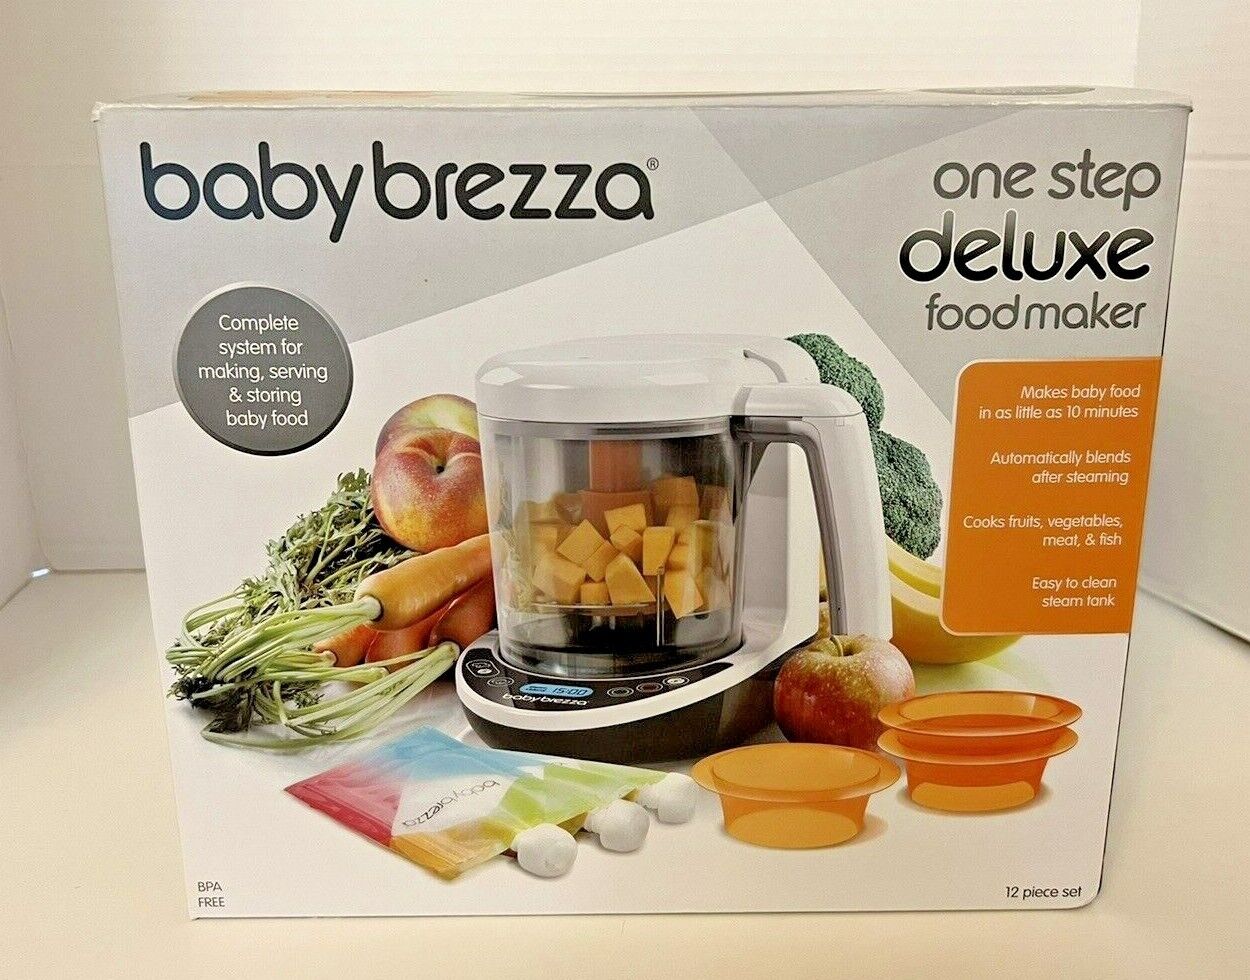 Baby Brezza One Step Deluxe Food Maker 12 Pc. Bpa Free 3.5 Cups. (new Open Box)